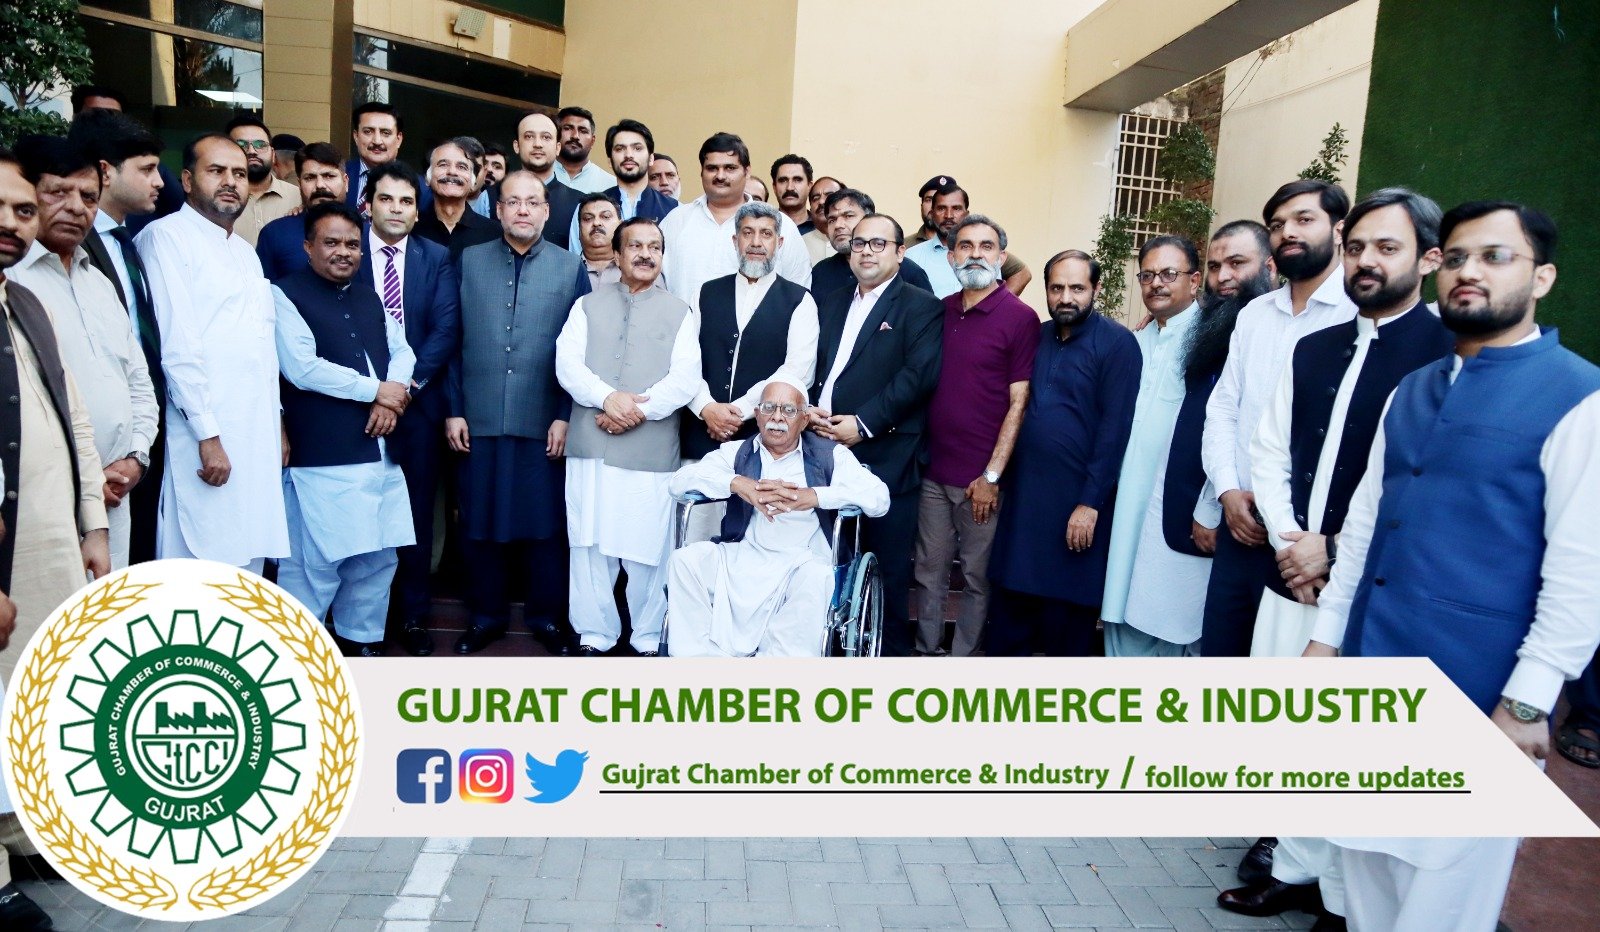 Ch. Shafay Hussain, the Provincial Minister of Industries, Commerce, Investment, and Skill Development, #ICI&SD paid a visit to Gujrat Chamber of Commerce & Industry for a meeting with the business community of #Gujrat.